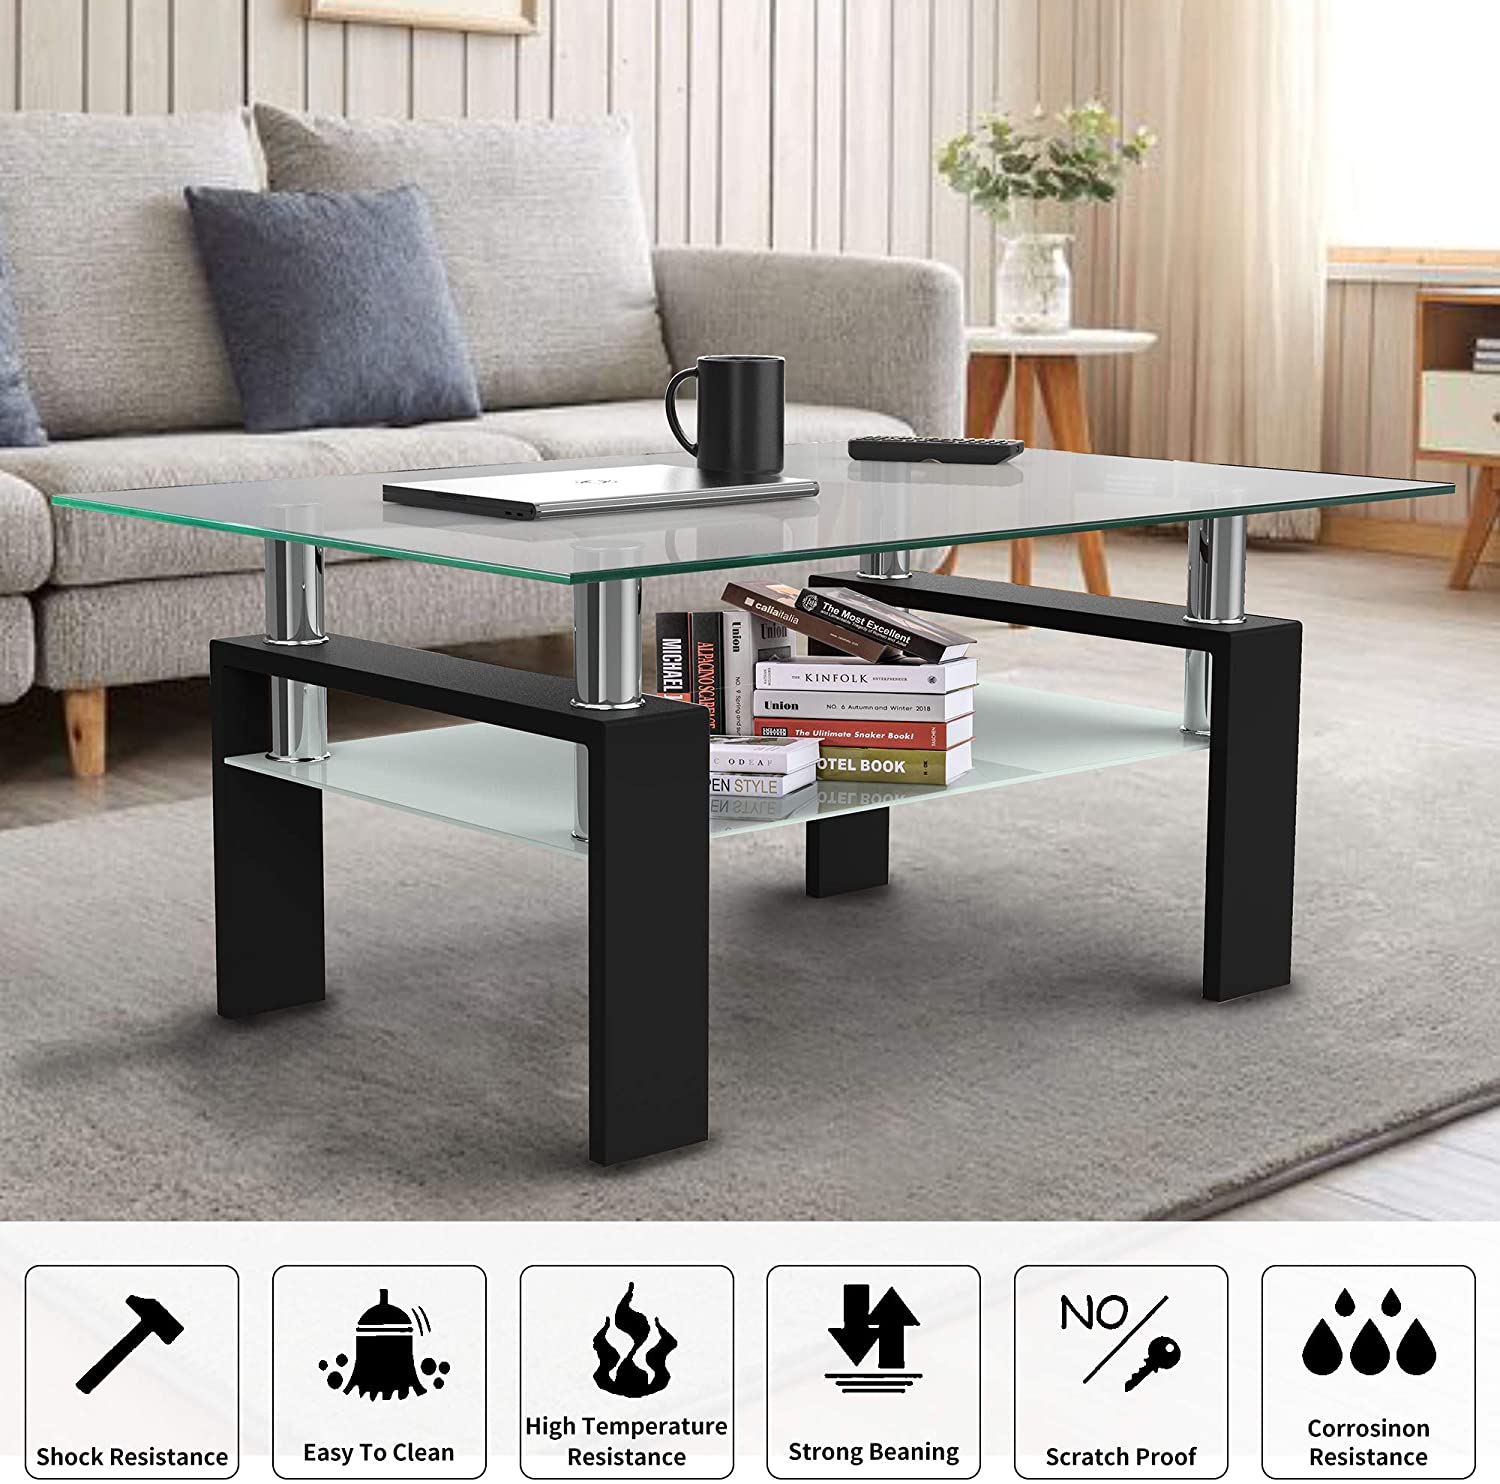 Glass Coffee Table with Lower Shelf, Clear Rectangle Glass Coffee Table, Modern Coffee Table with Metal Legs, Rectangle Center Table Sofa Table Home Furniture for Living Room, L5509 - image 4 of 9